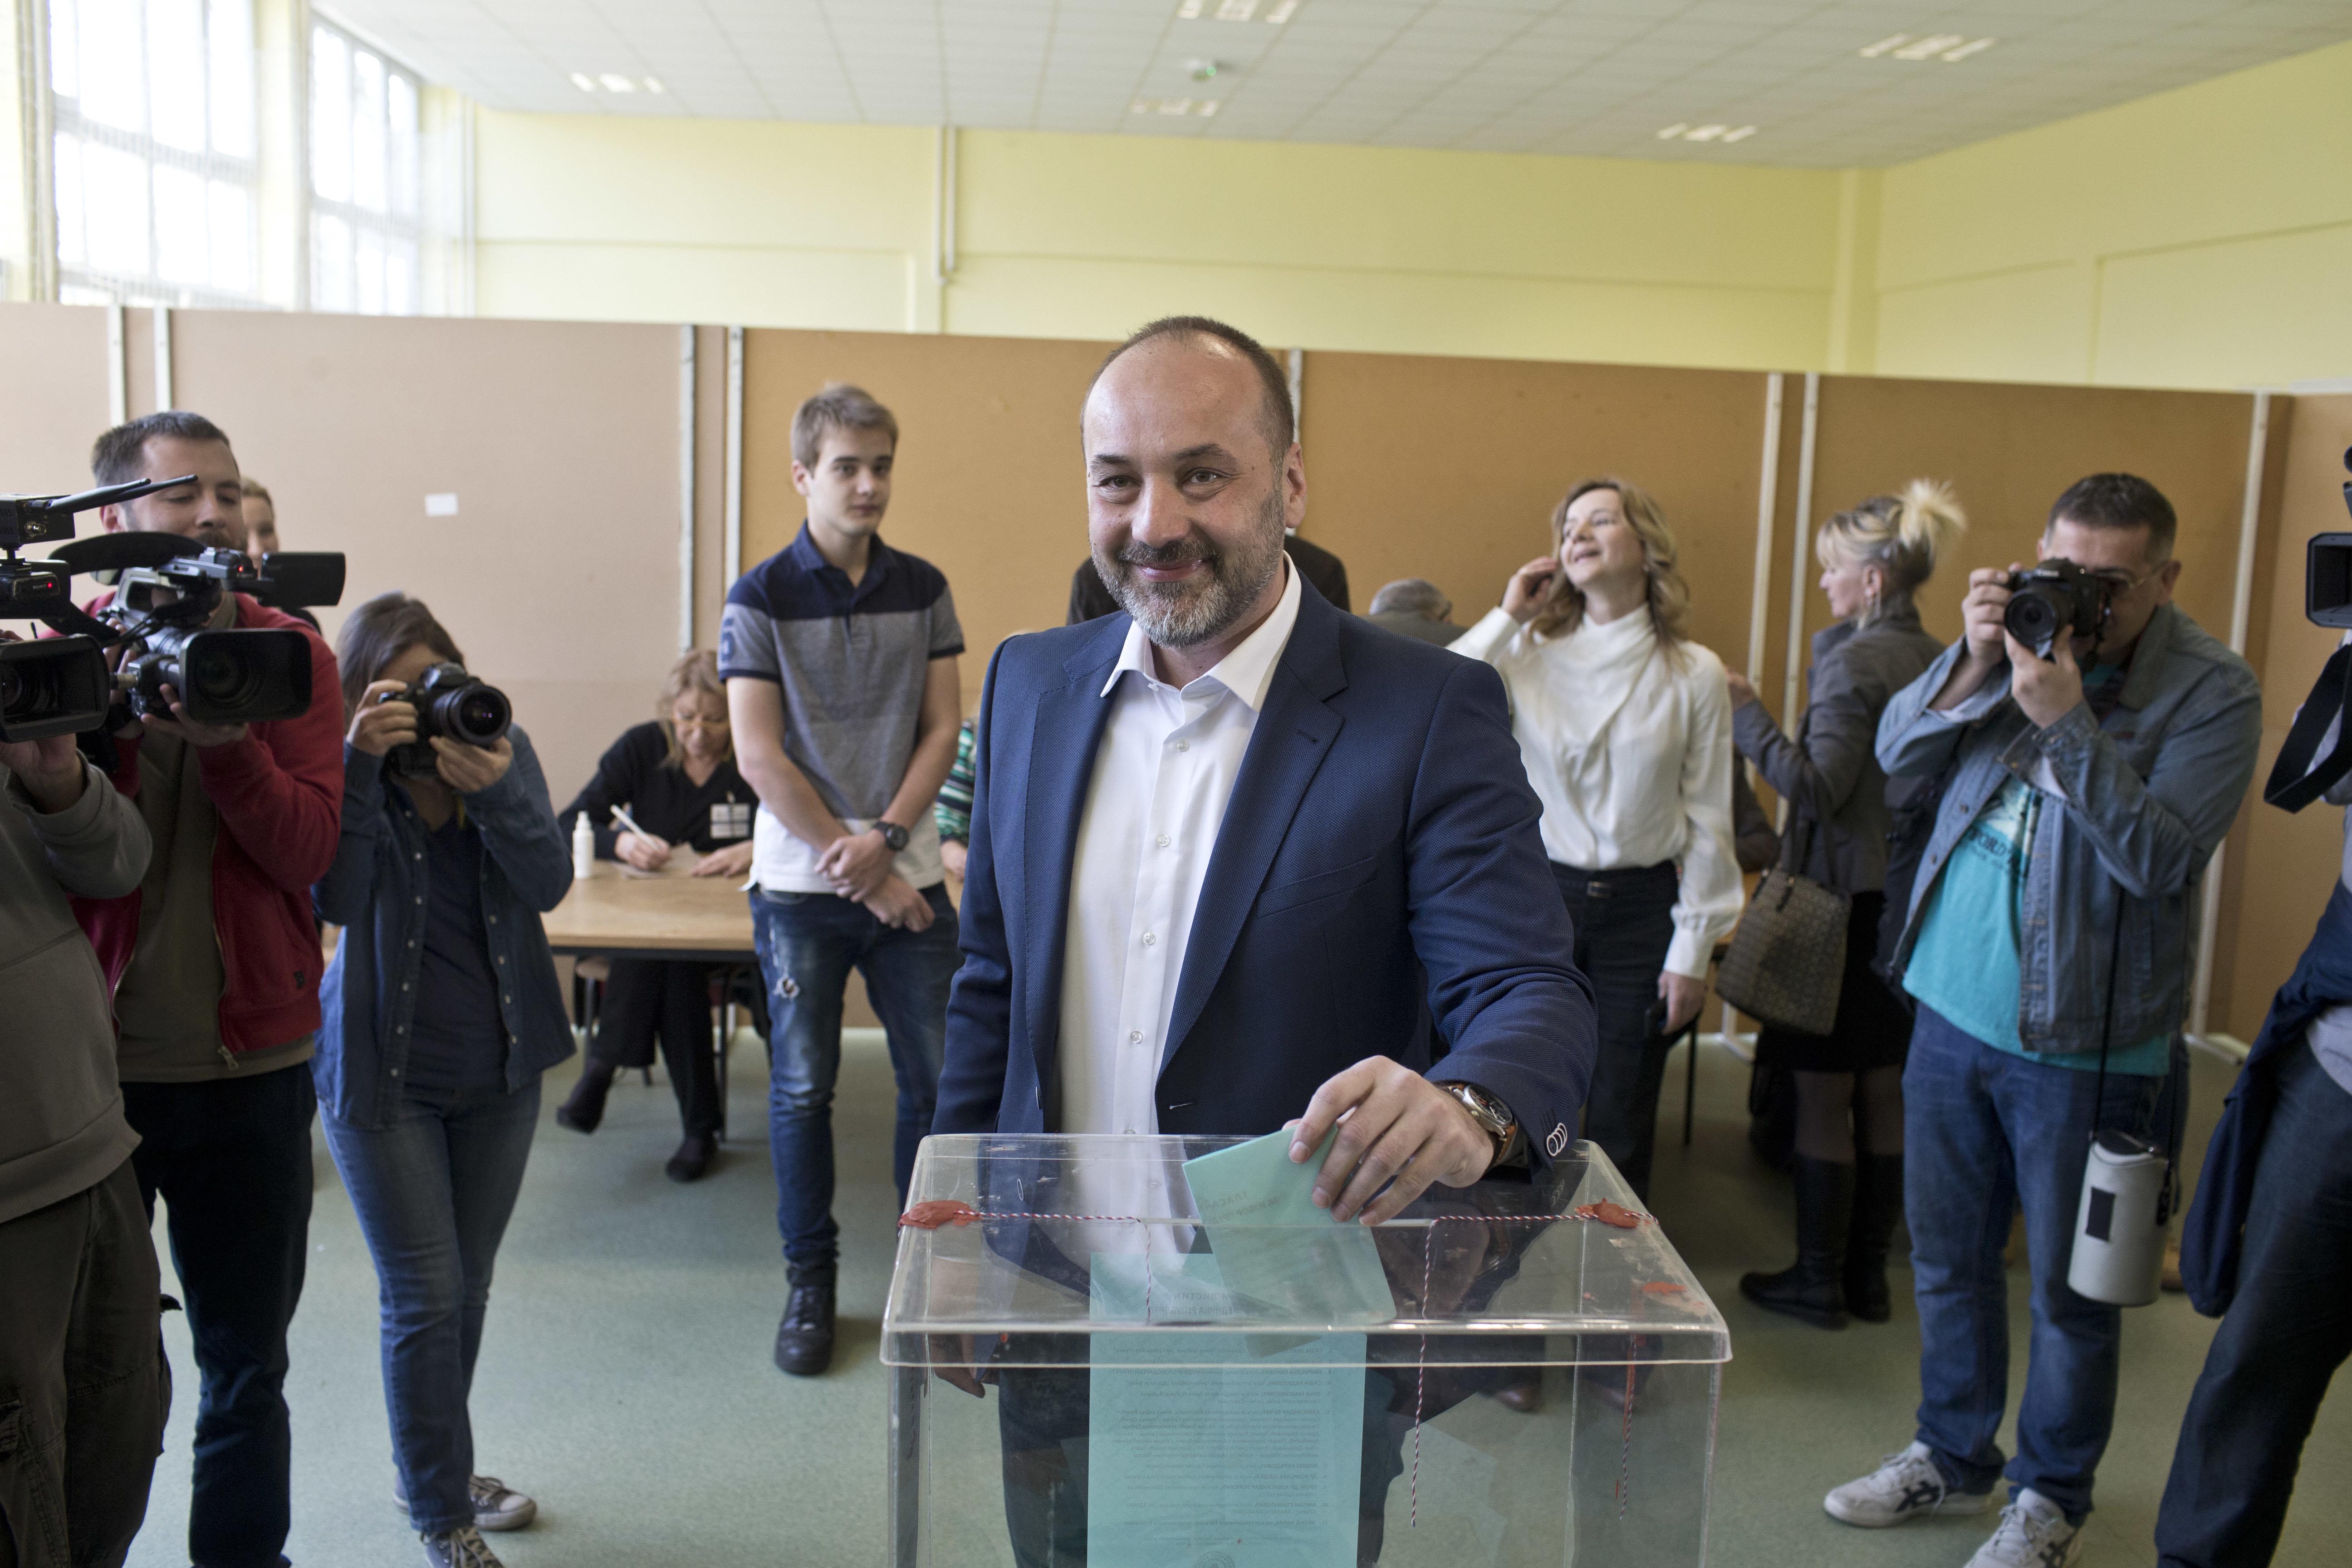 Sasa Jankovic (center), a Serbian presidential candidate, casts his ballot for the presidential elections at a polling station in Belgrade, Serbia, on Sunday, April 2, 2017. Photo: AP